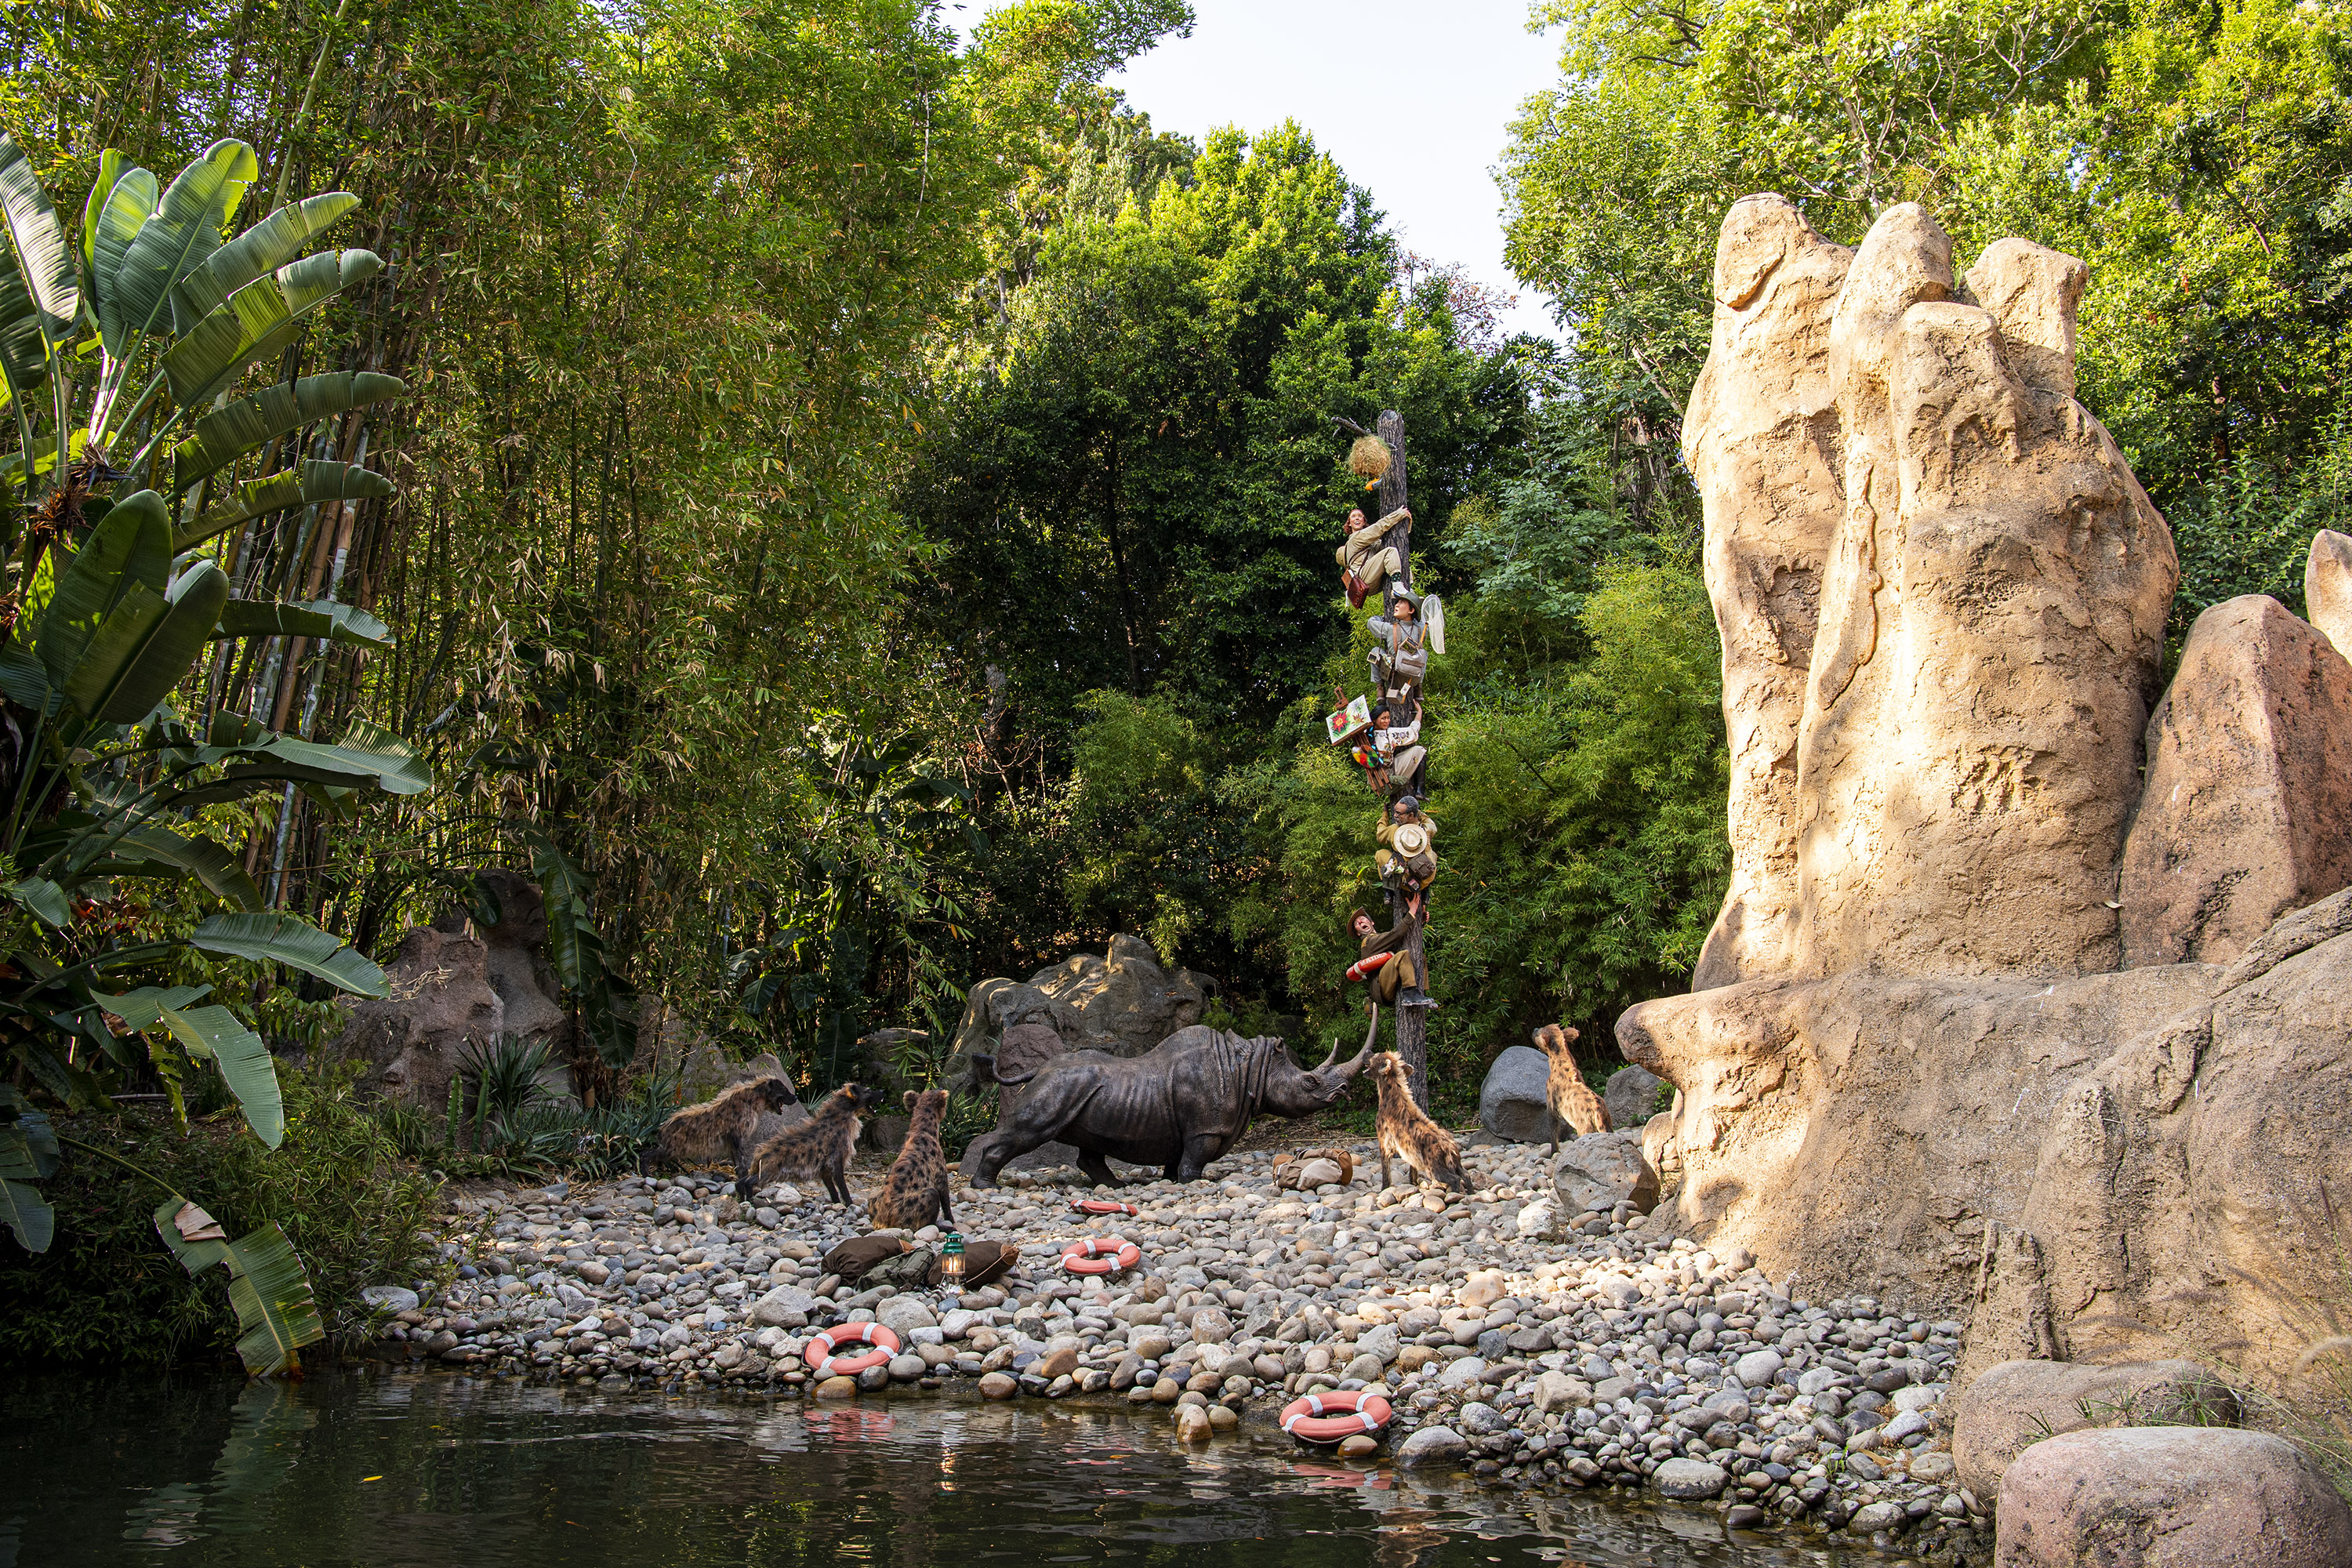 The new  trapped safari  scene at Disneyland Park's reopened Jungle Cruise